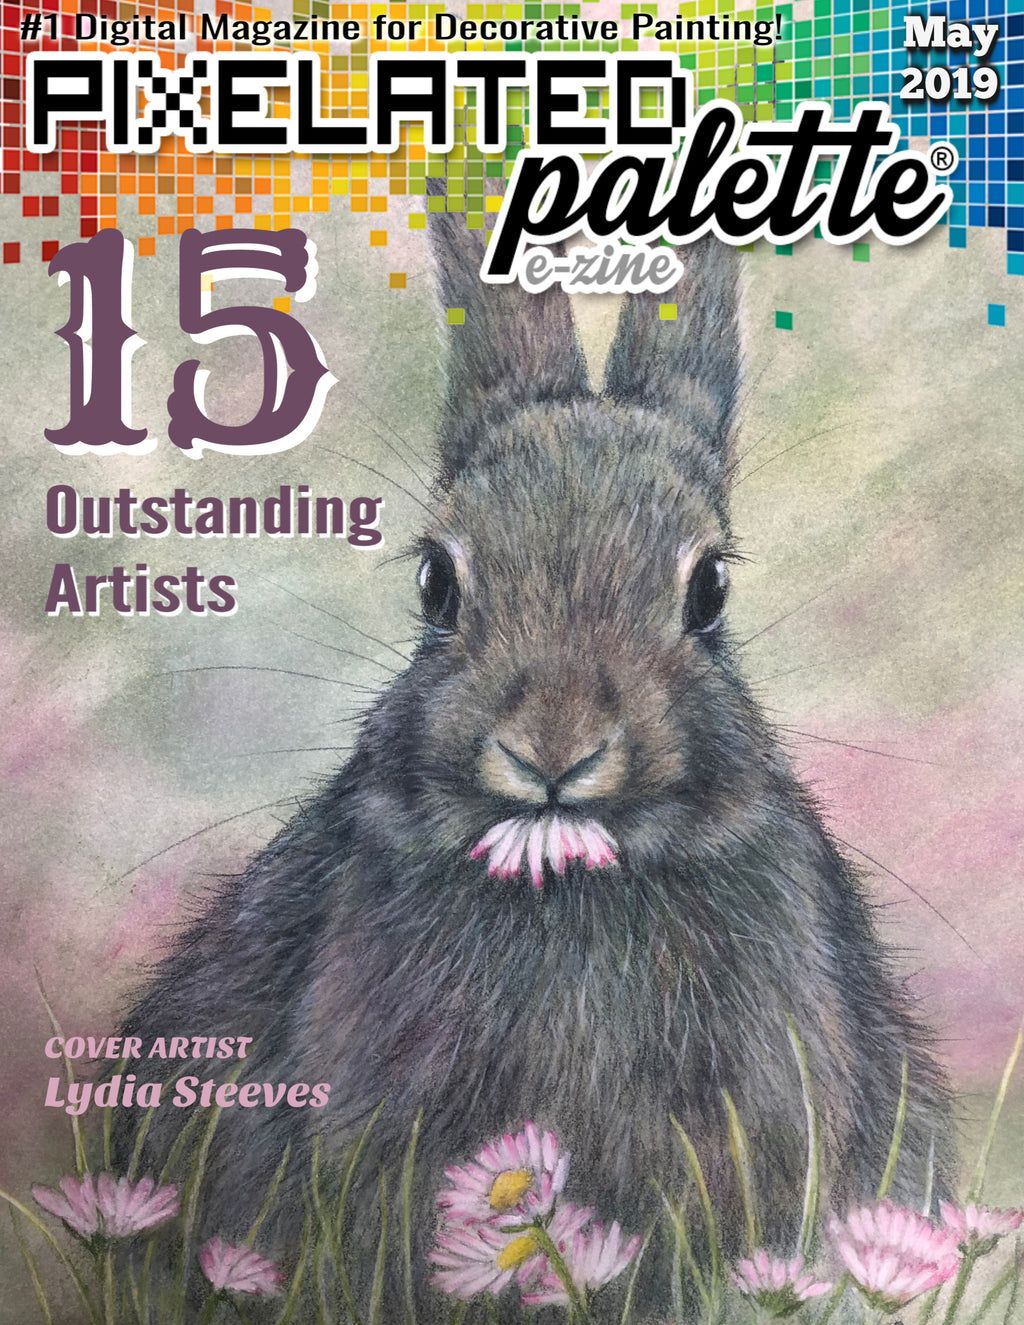 Pixelated Palette - May 2019 Issue Download